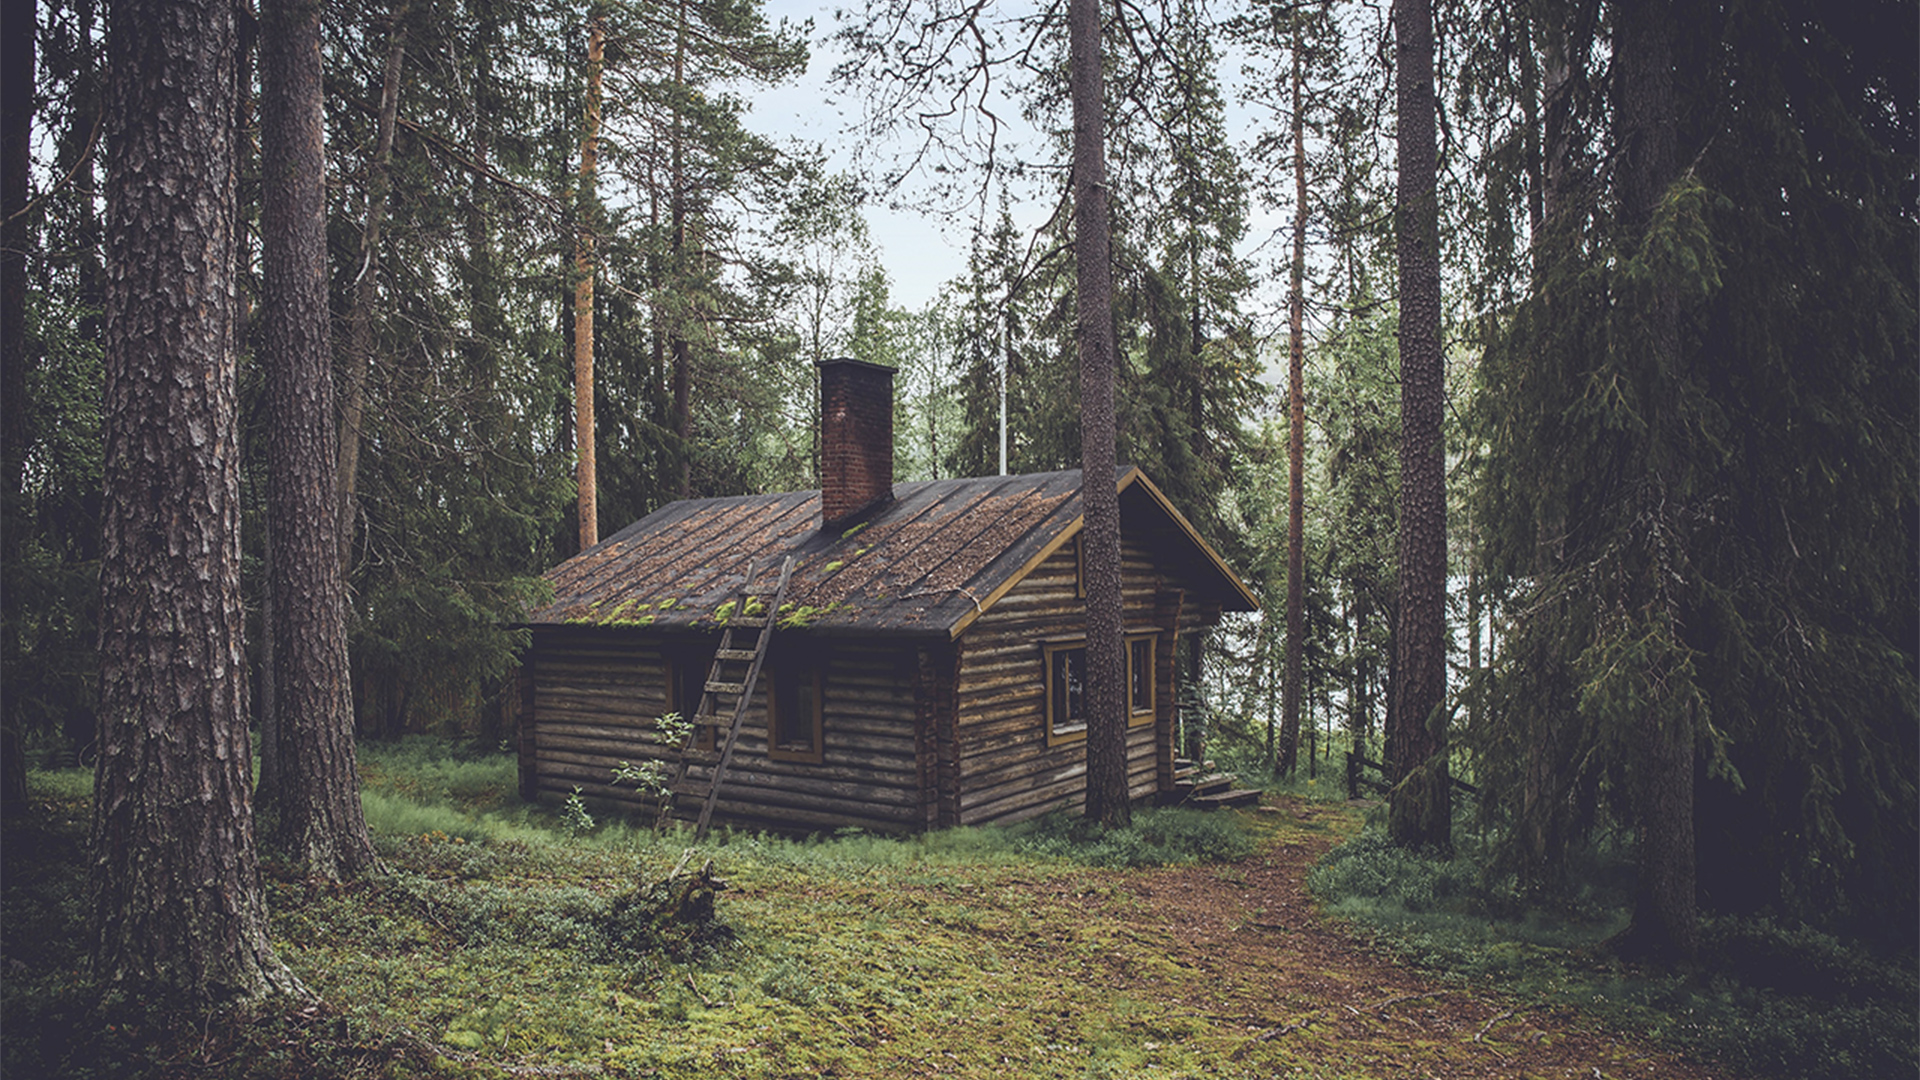 Cottage in the woods